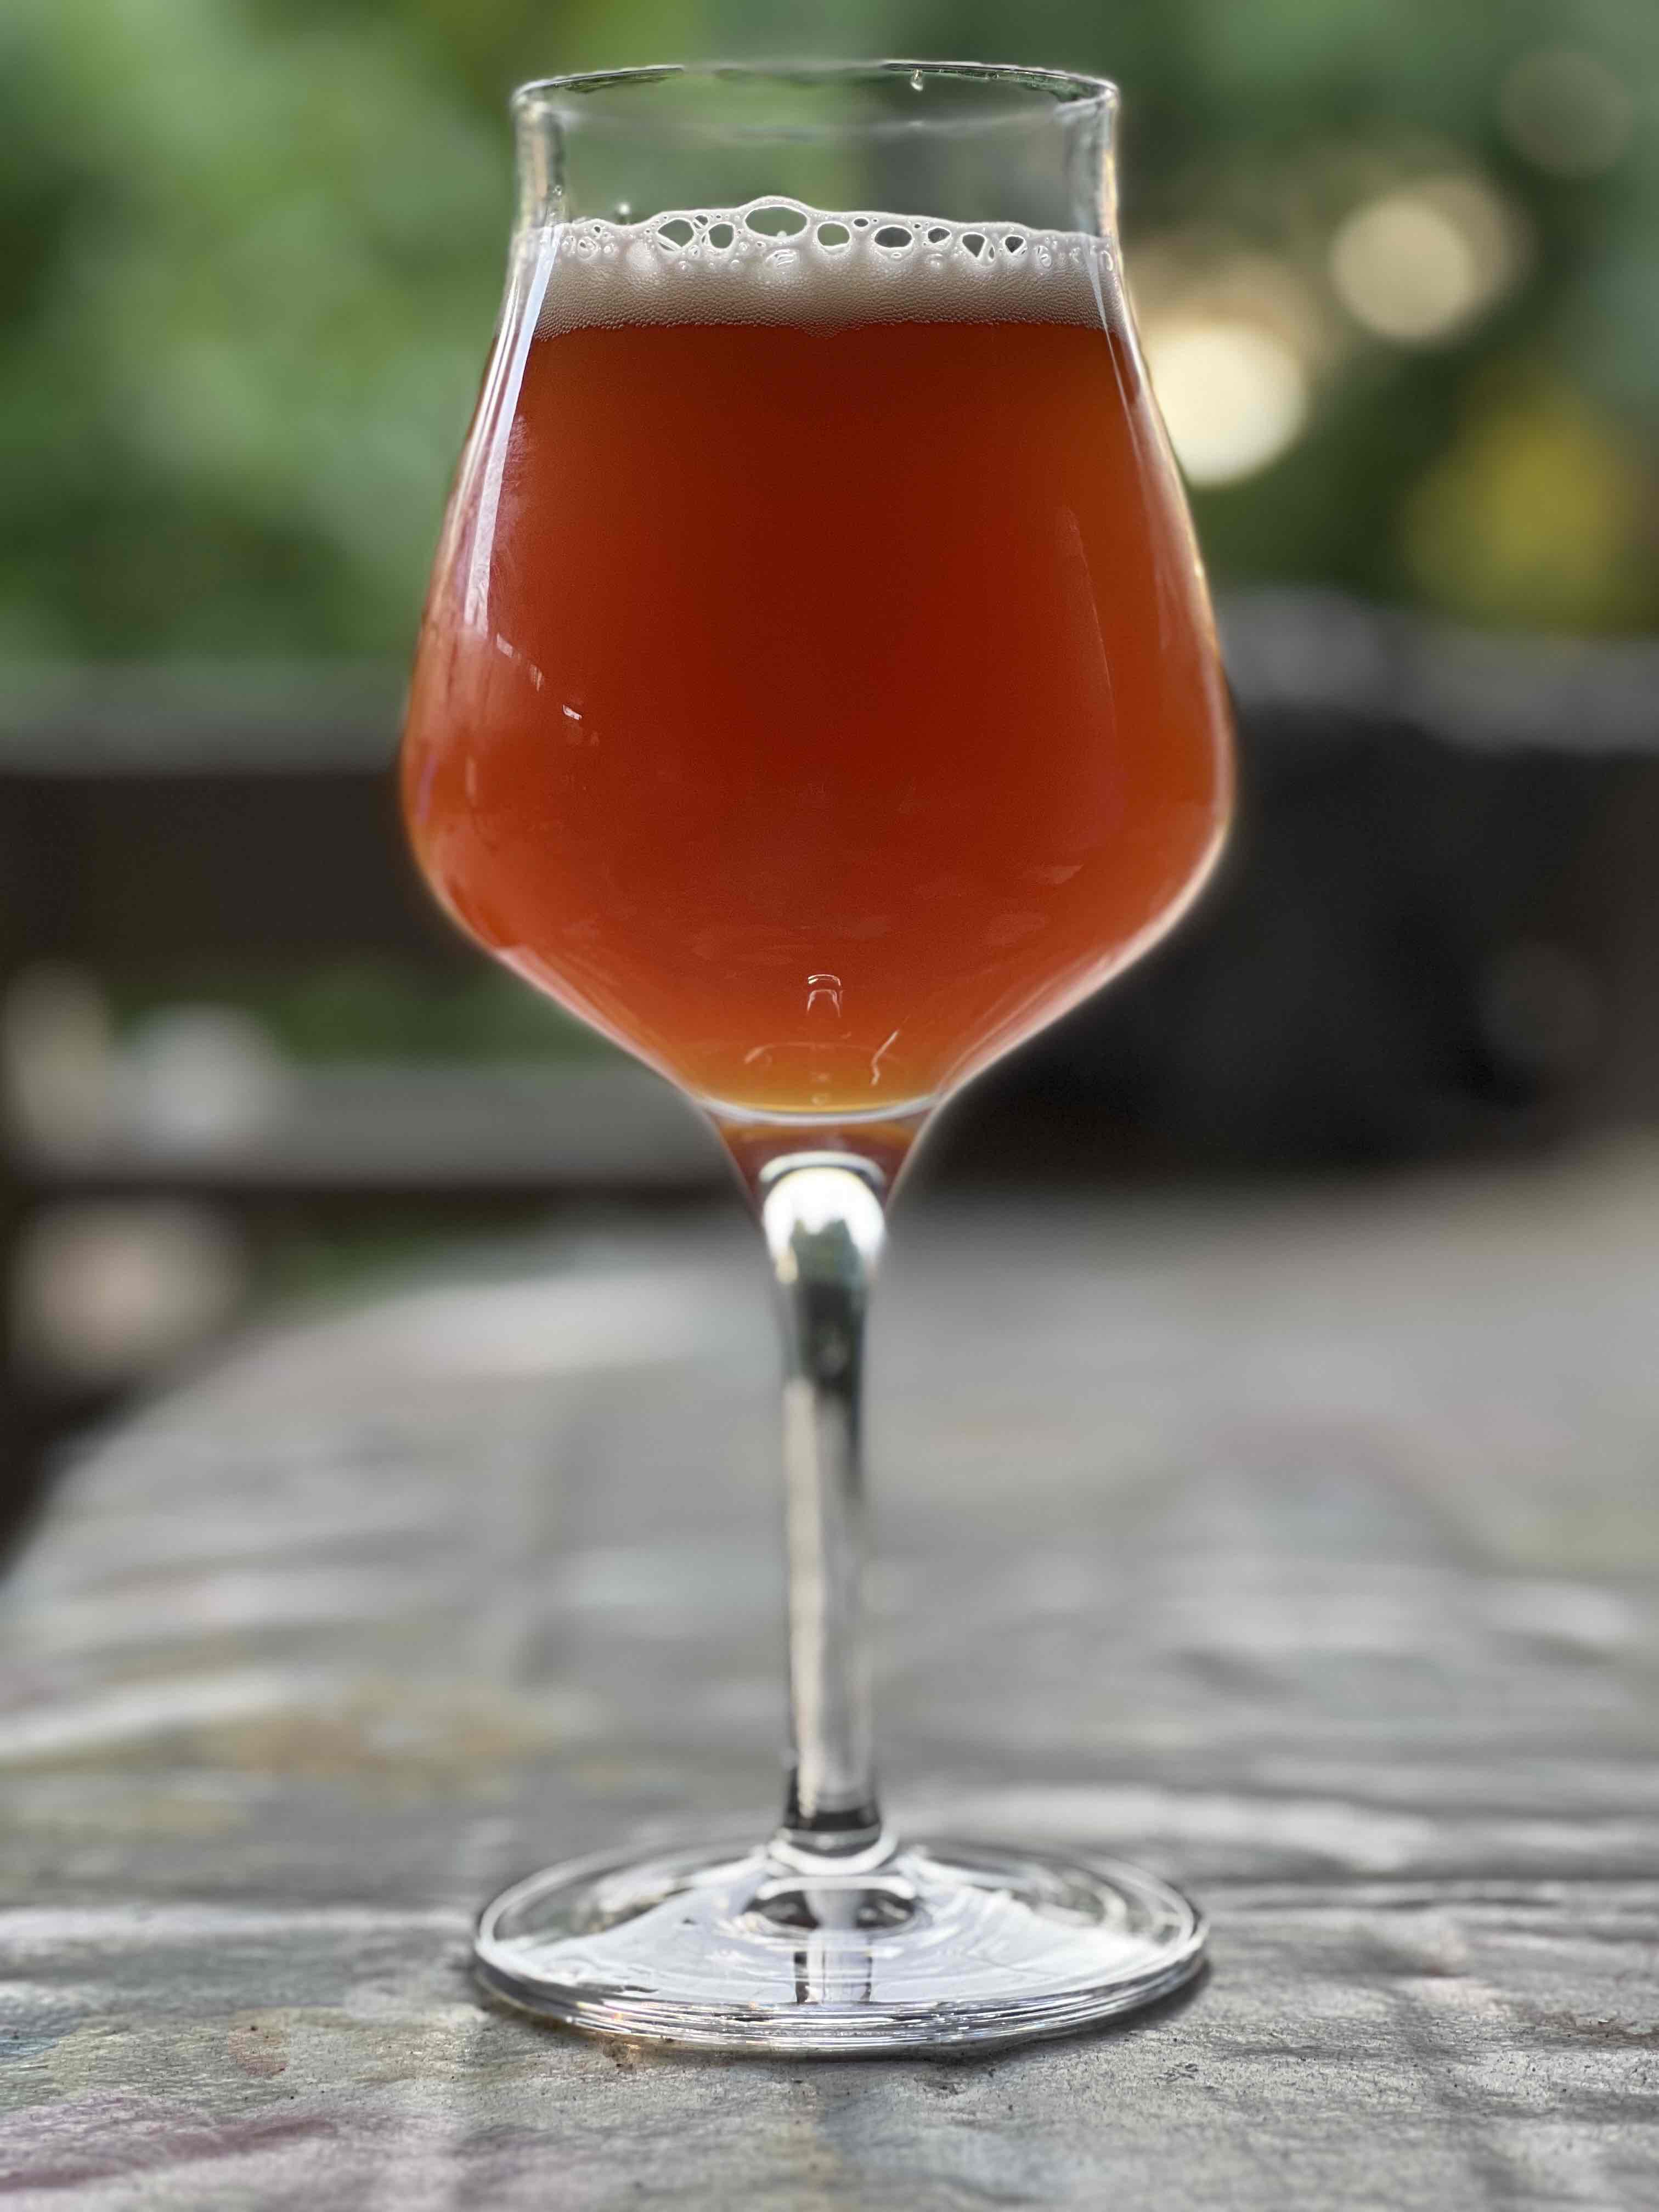 A glass of beer, copper-ish brown/red